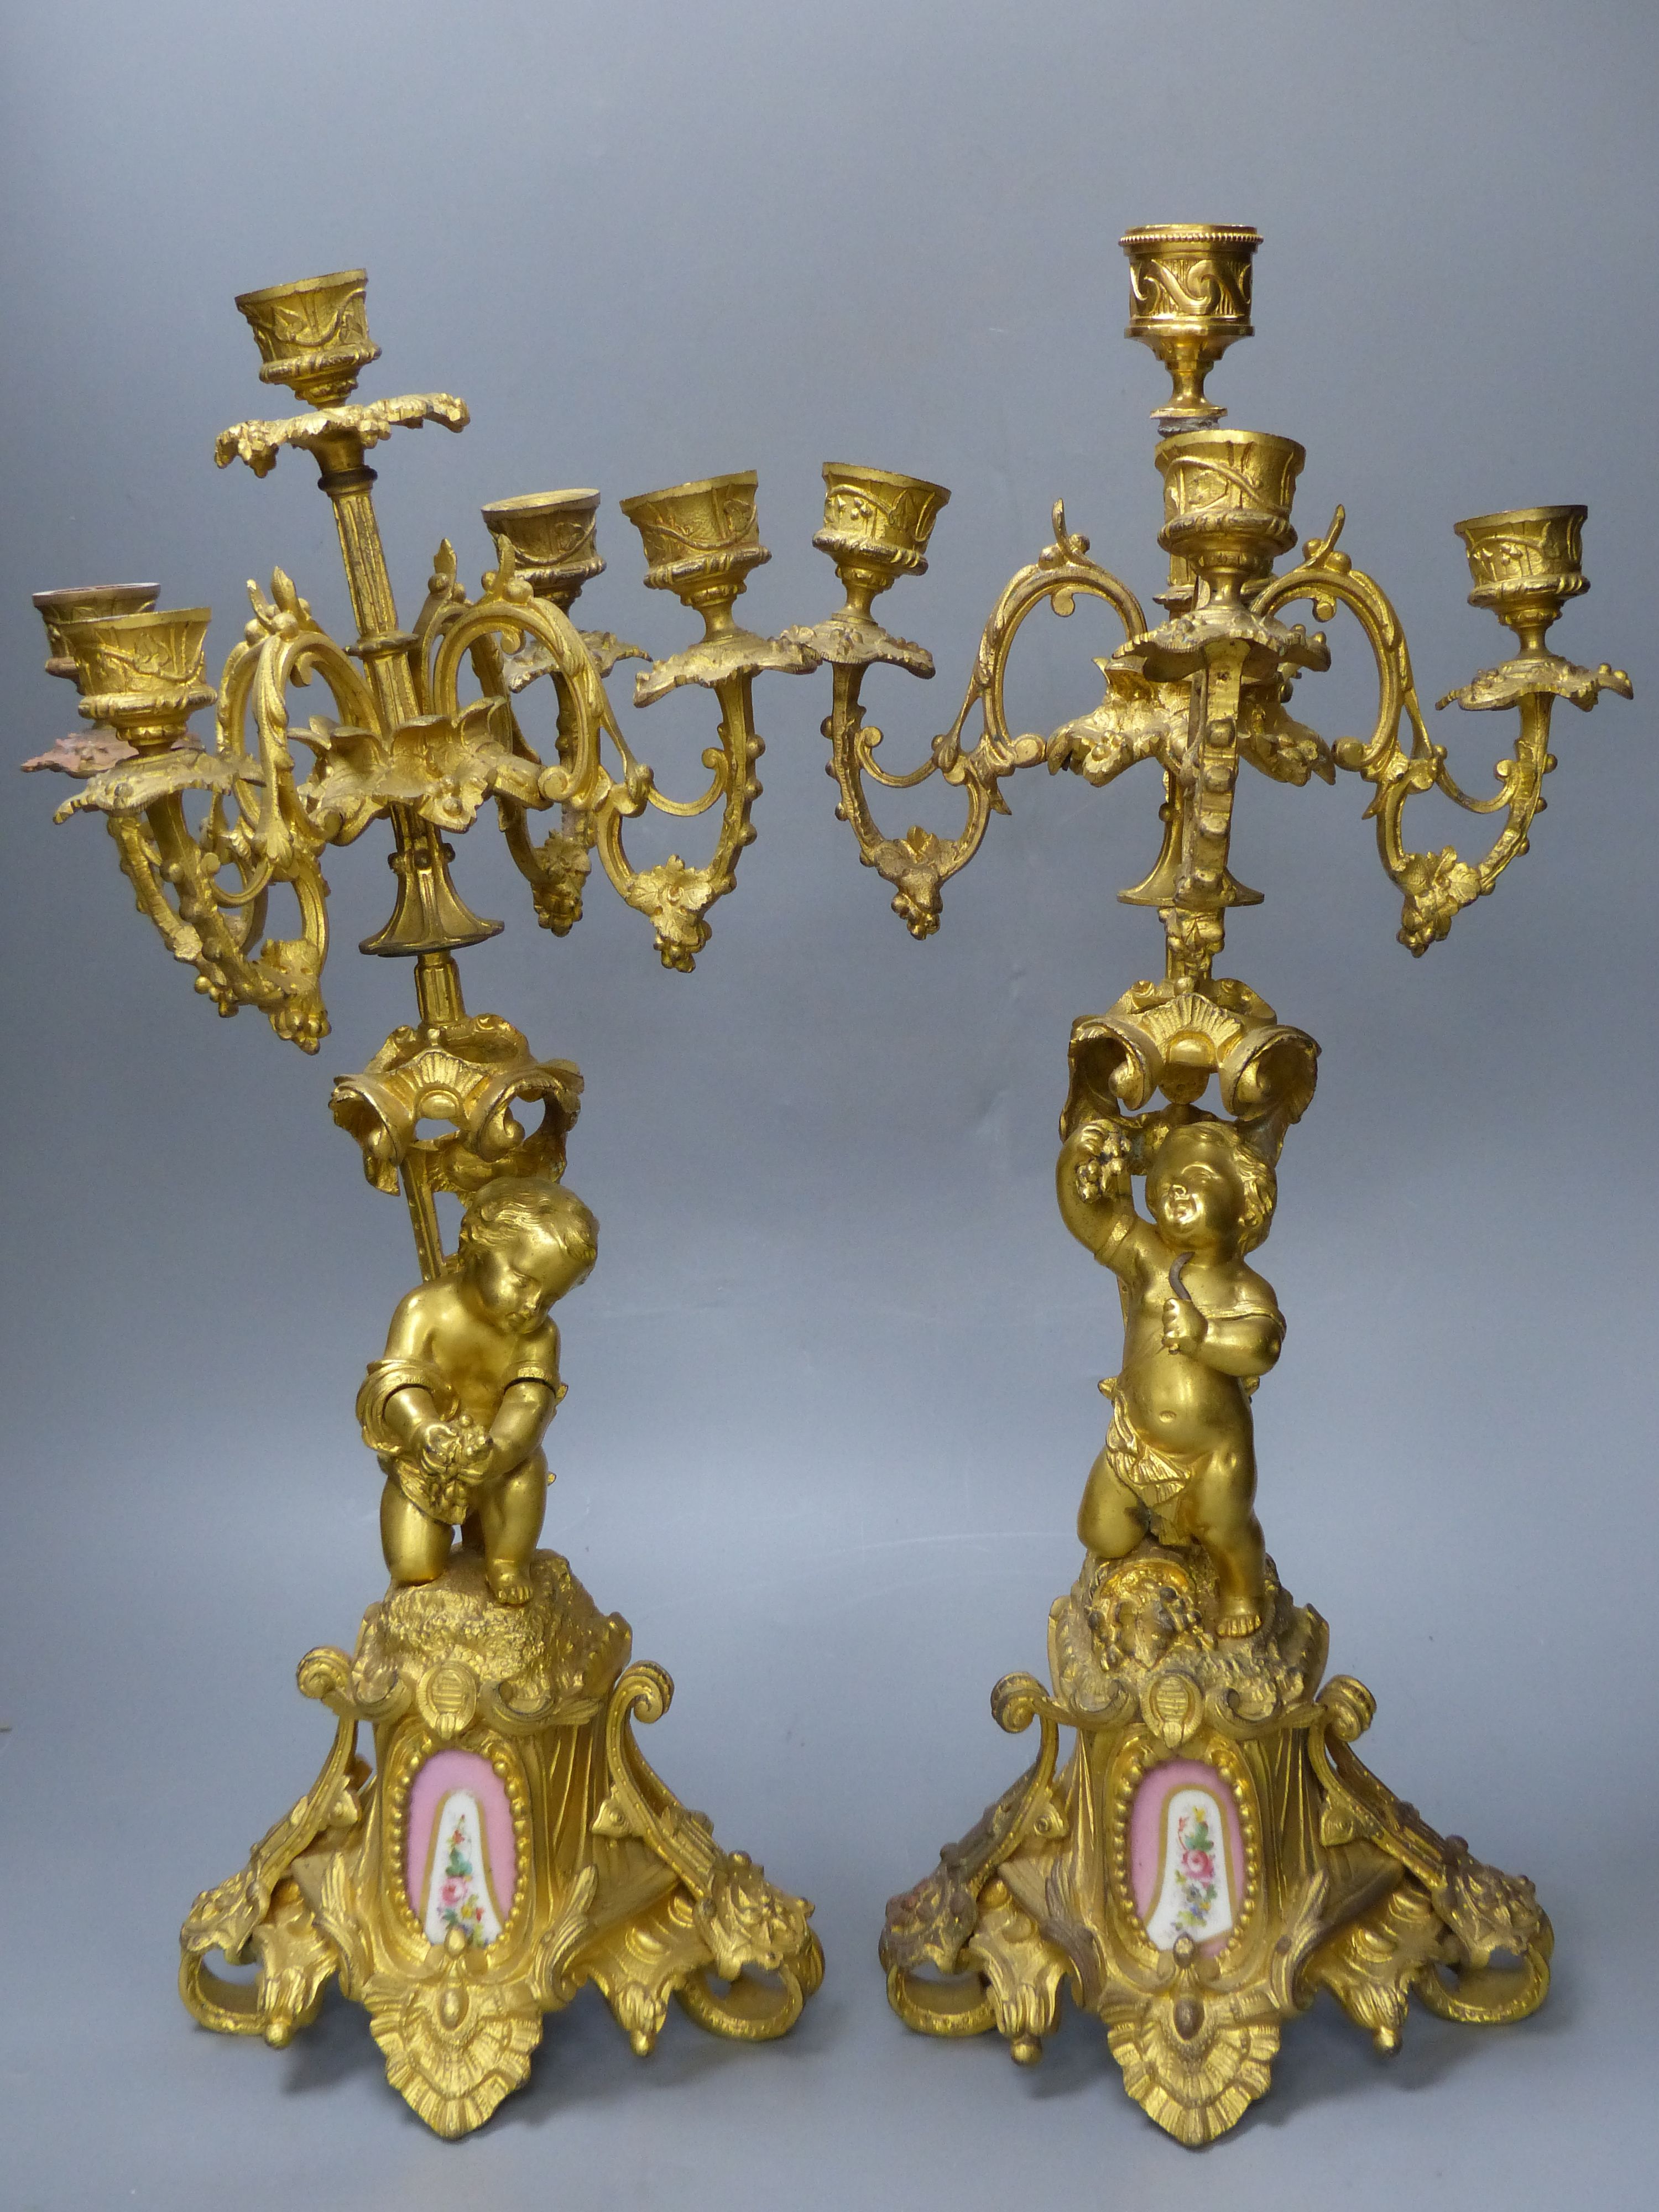 A pair of 19th century French ormolu cherub candelabra, with porcelain plaques to base, height 47.5cm